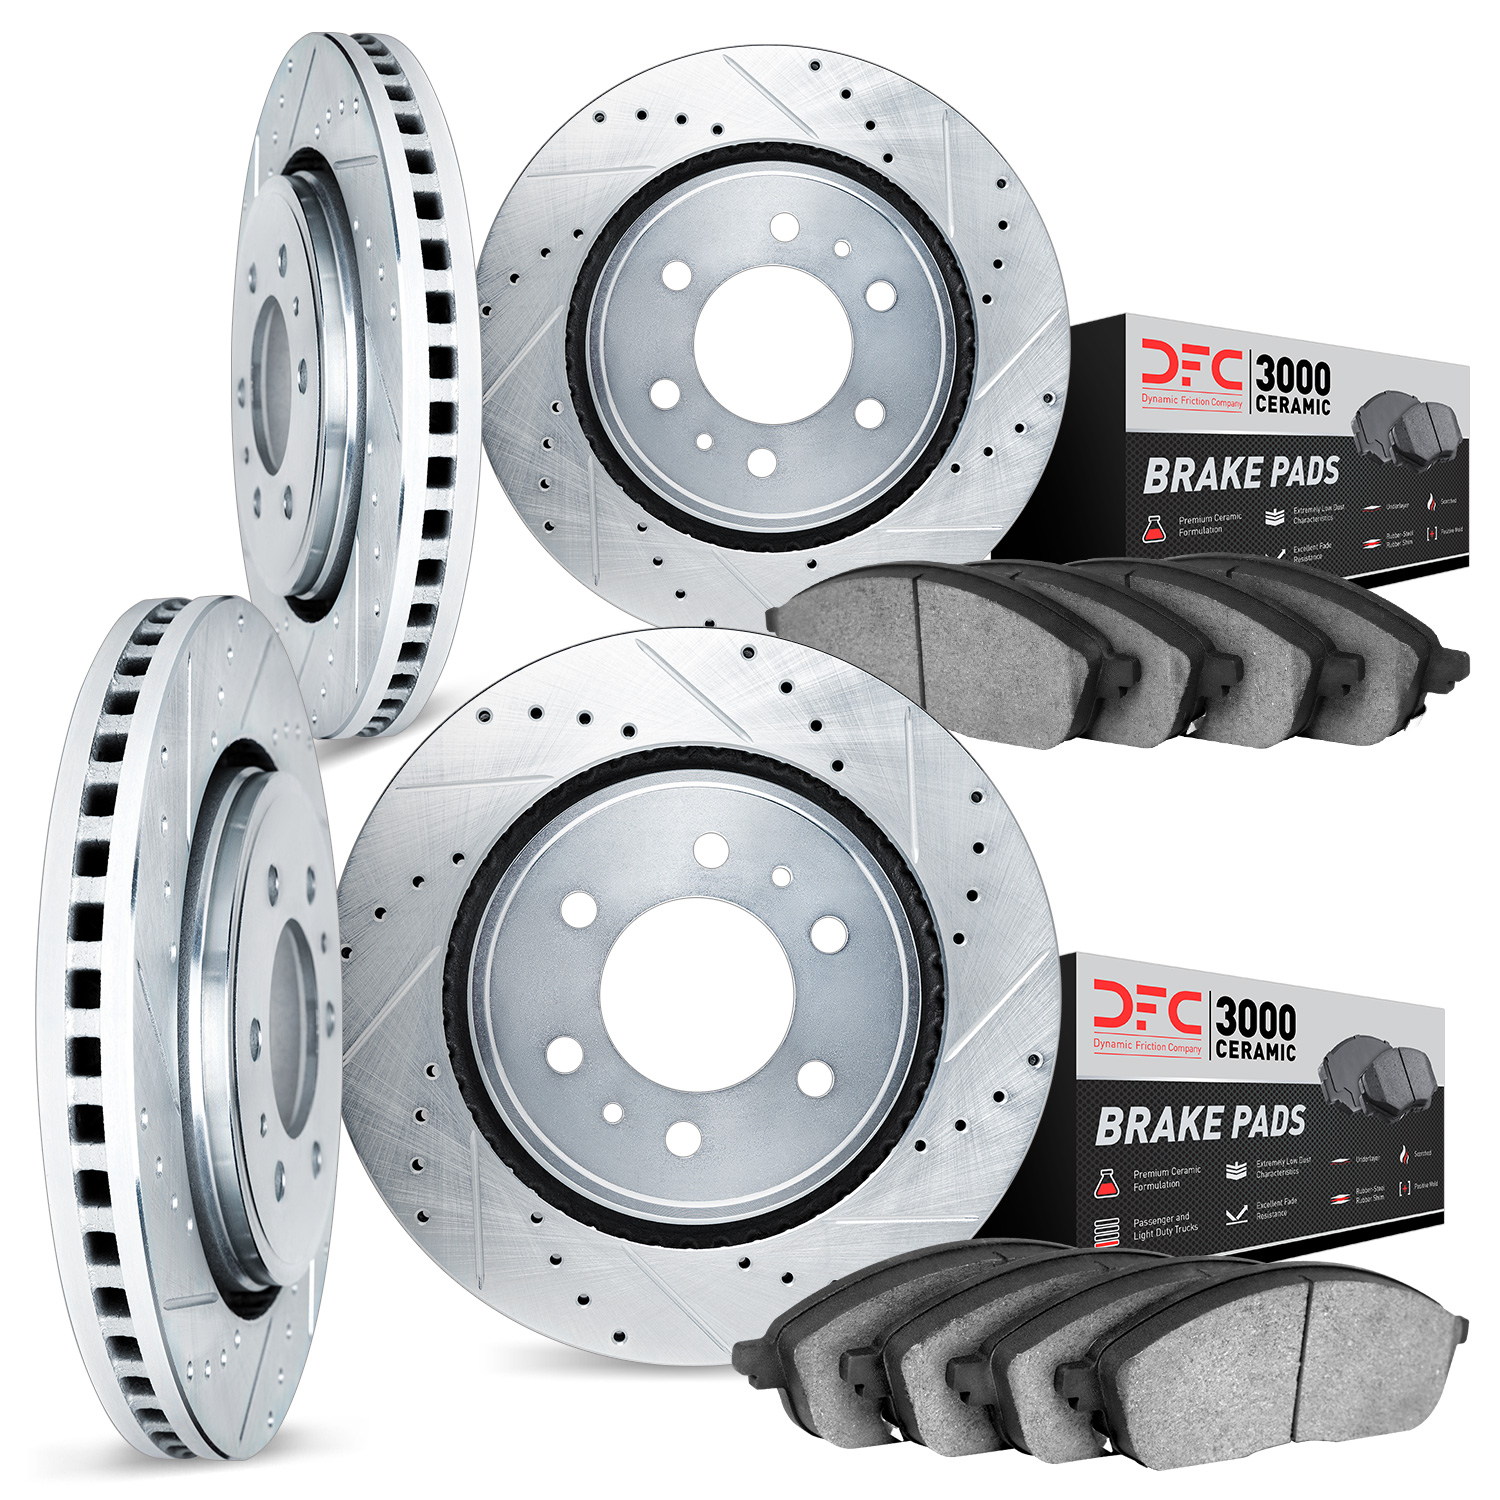 7304-54065 Drilled/Slotted Brake Rotor with 3000-Series Ceramic Brake Pads Kit [Silver], 2004-2008 Ford/Lincoln/Mercury/Mazda, P